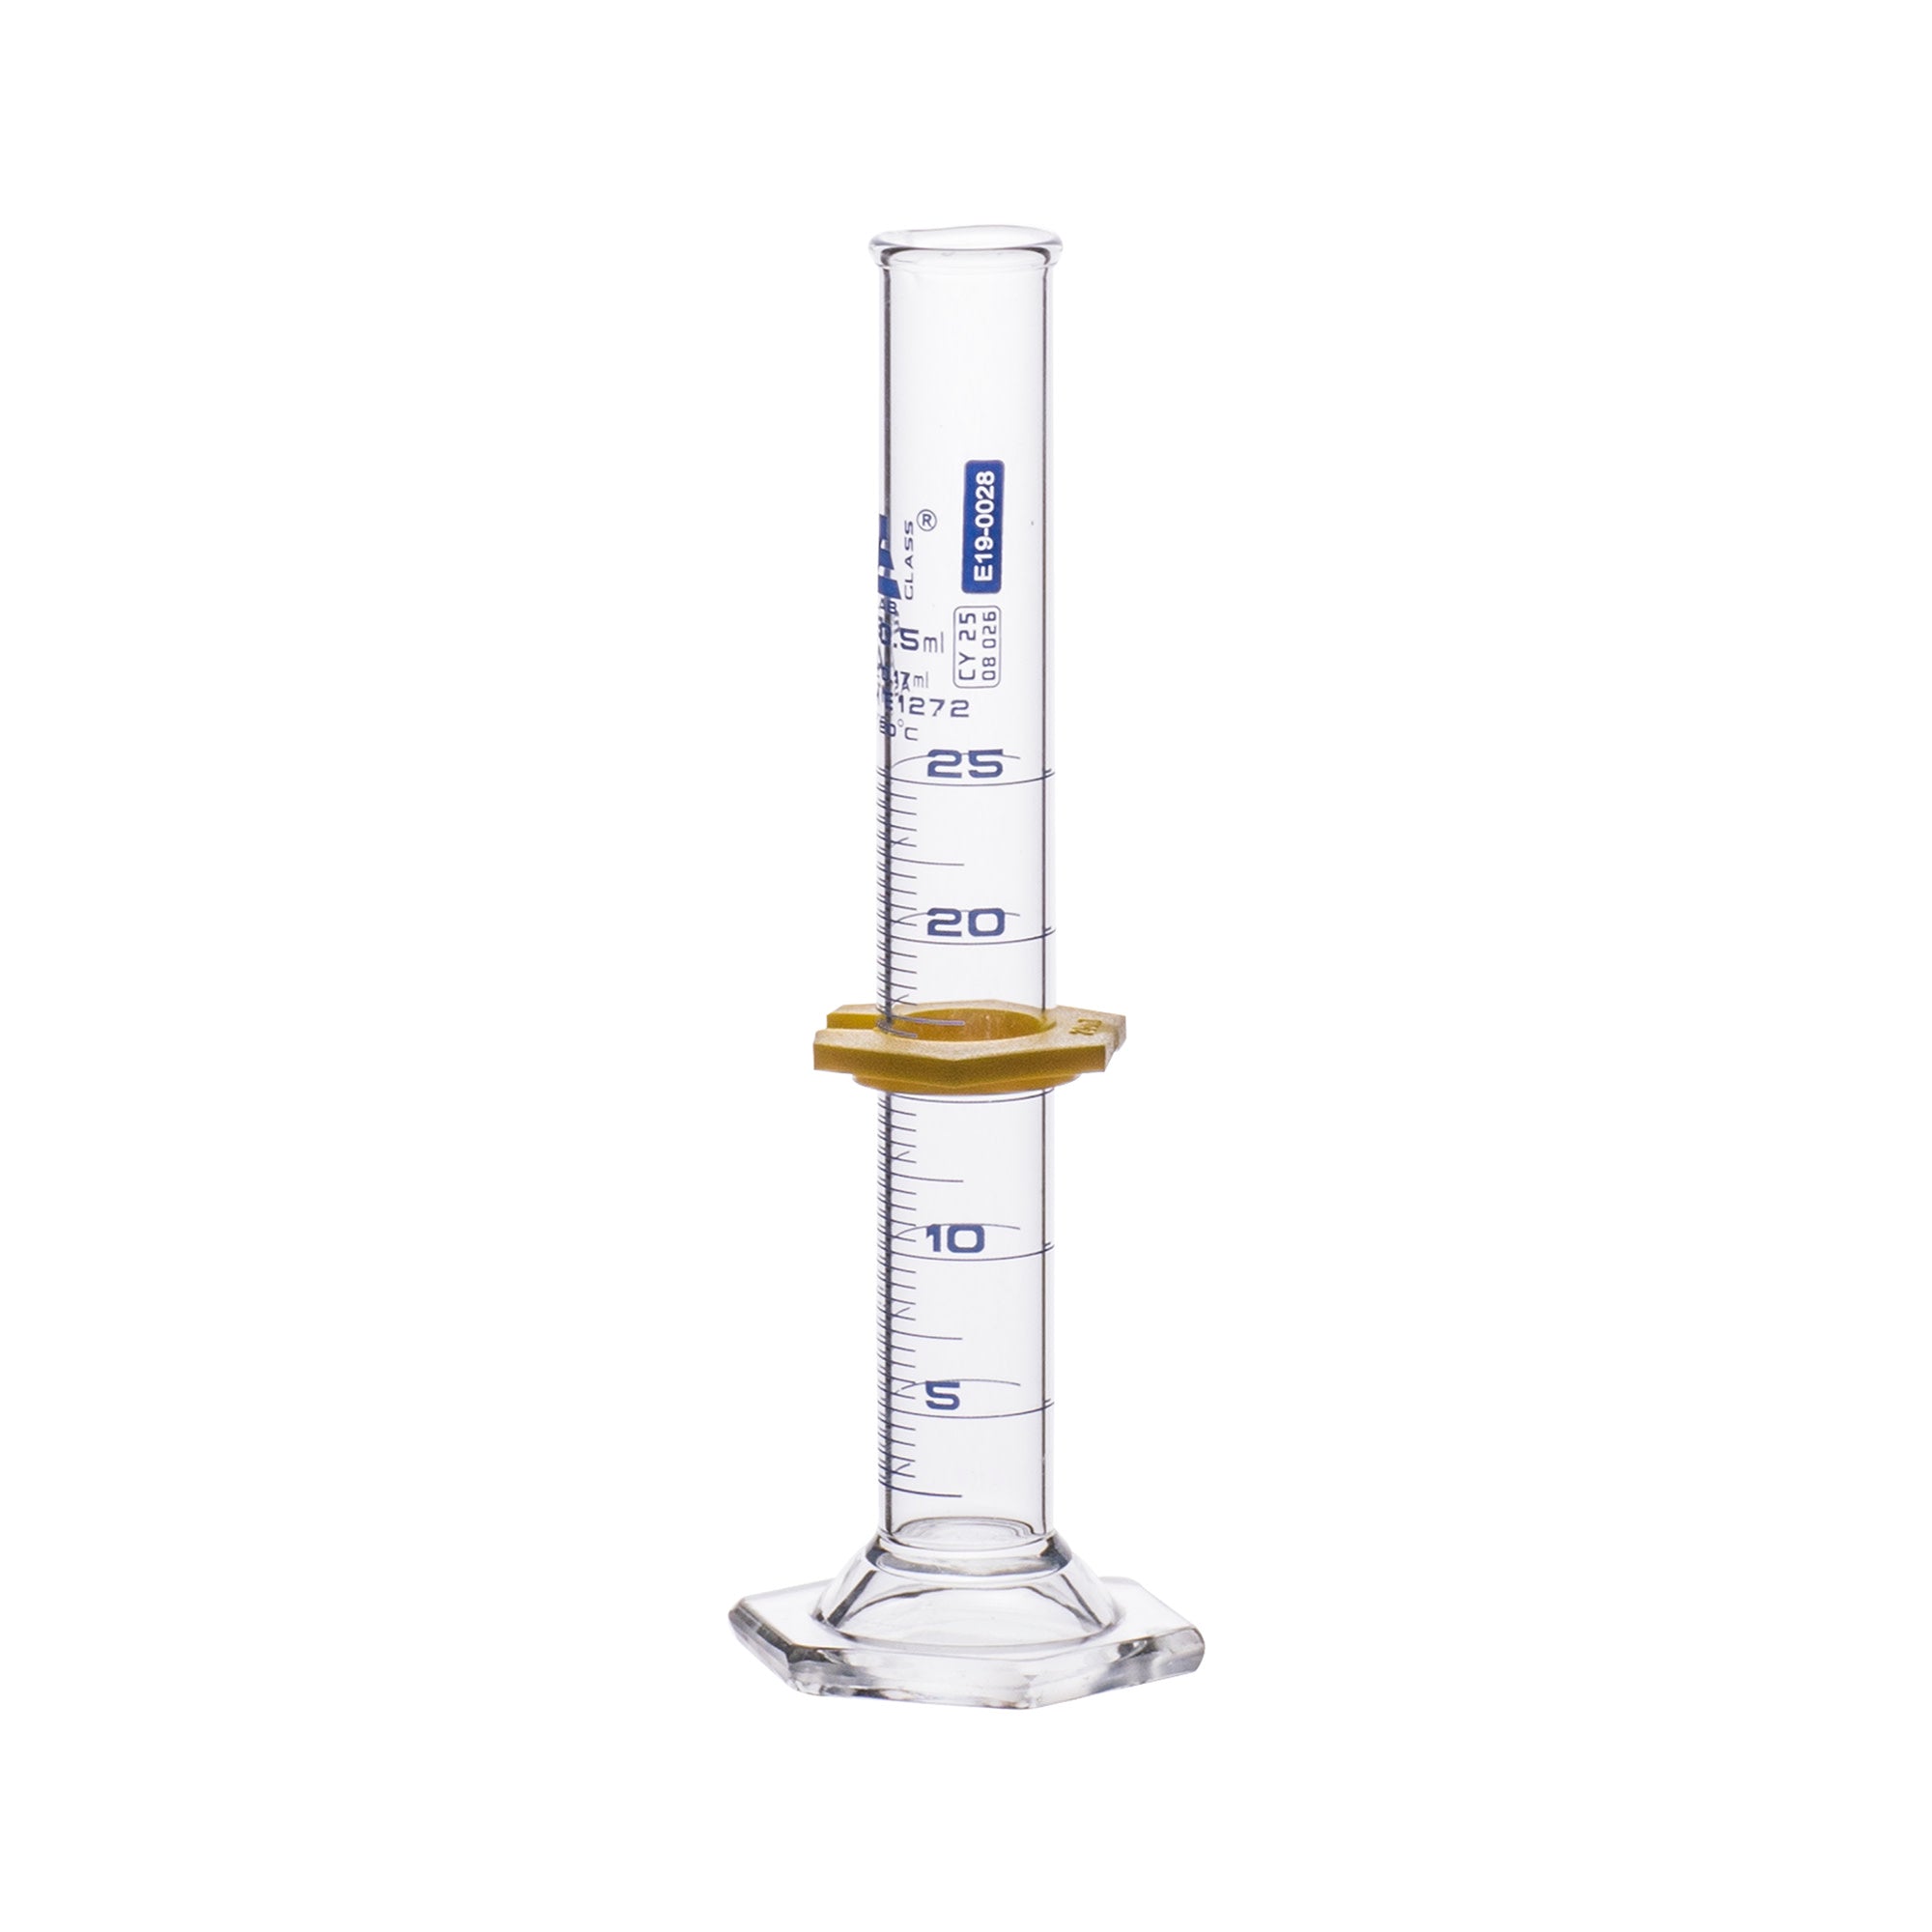 Borosilicate Glass ASTM Graduated Cylinder with Hexagonal Base and Guard, 25 ml, Class A with USP & Individual Work Certificate, Autoclavable